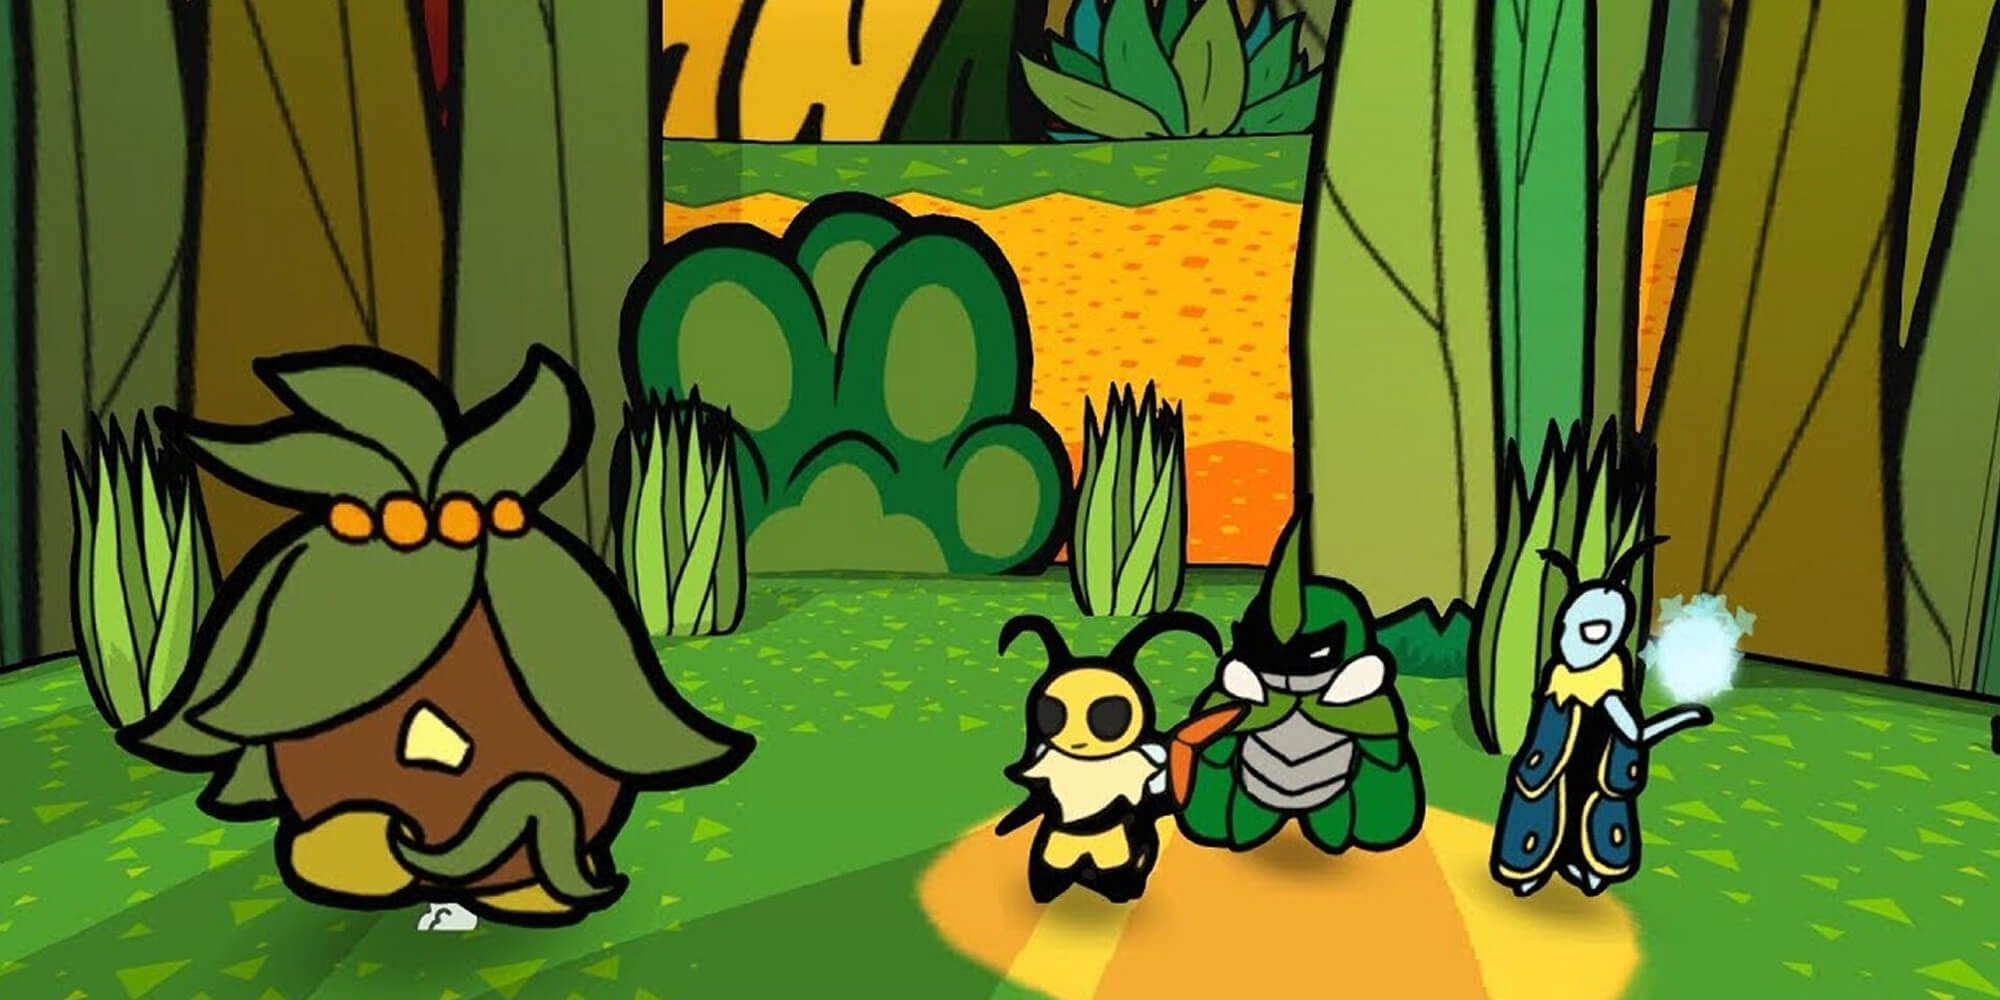 The Bug Trio Faces A Giant Seedling